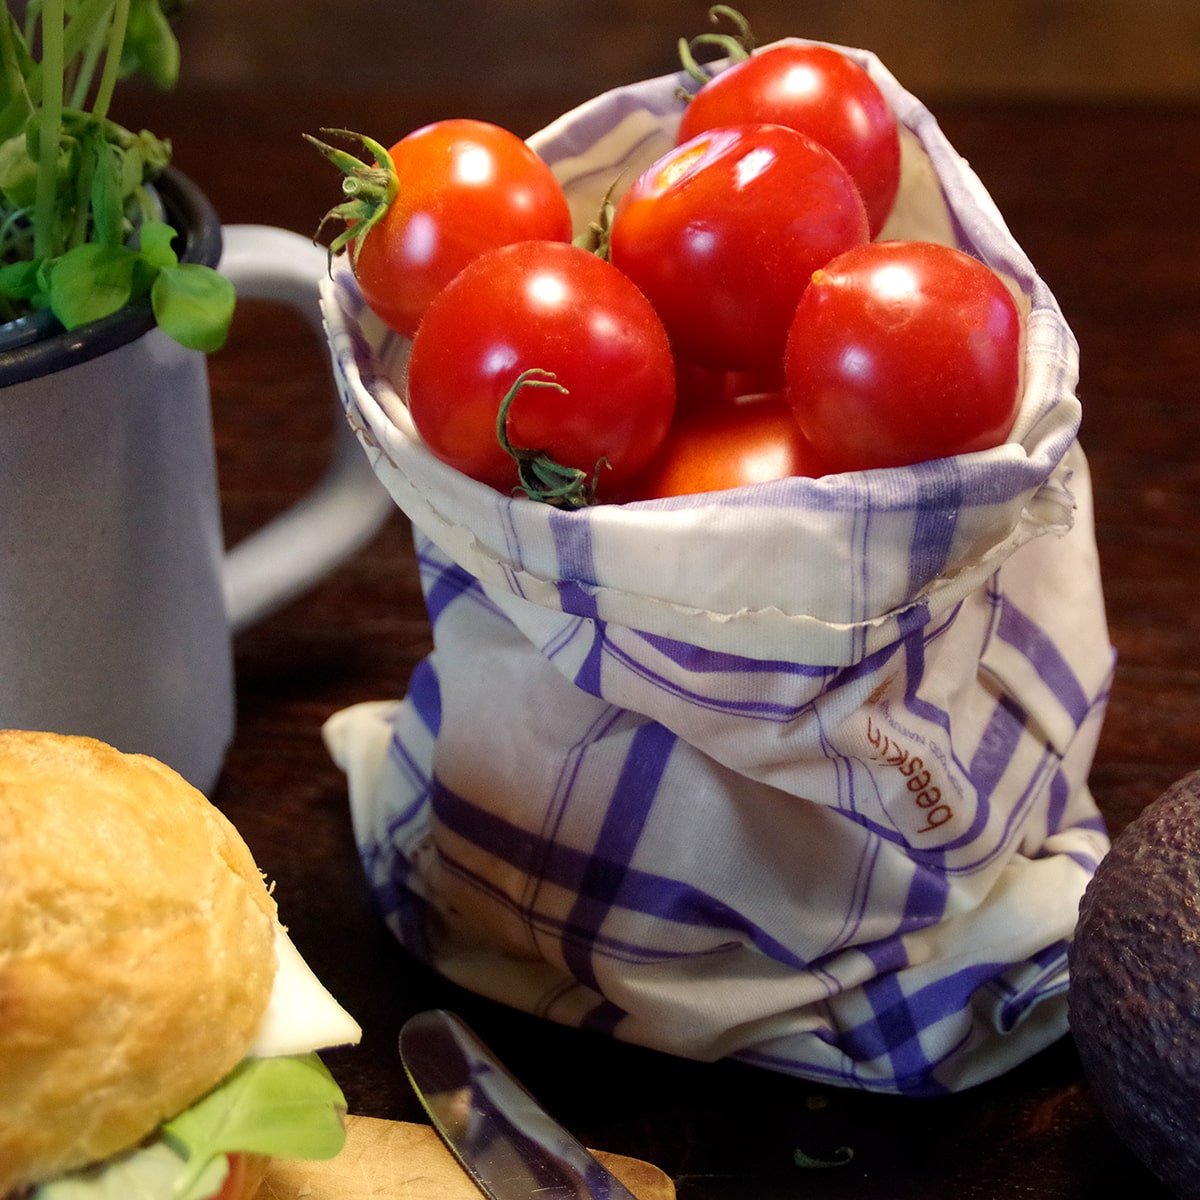 beeswax bag size s kitchen standing on a wooden table with tomatoes surrounded by a roll and an avocado